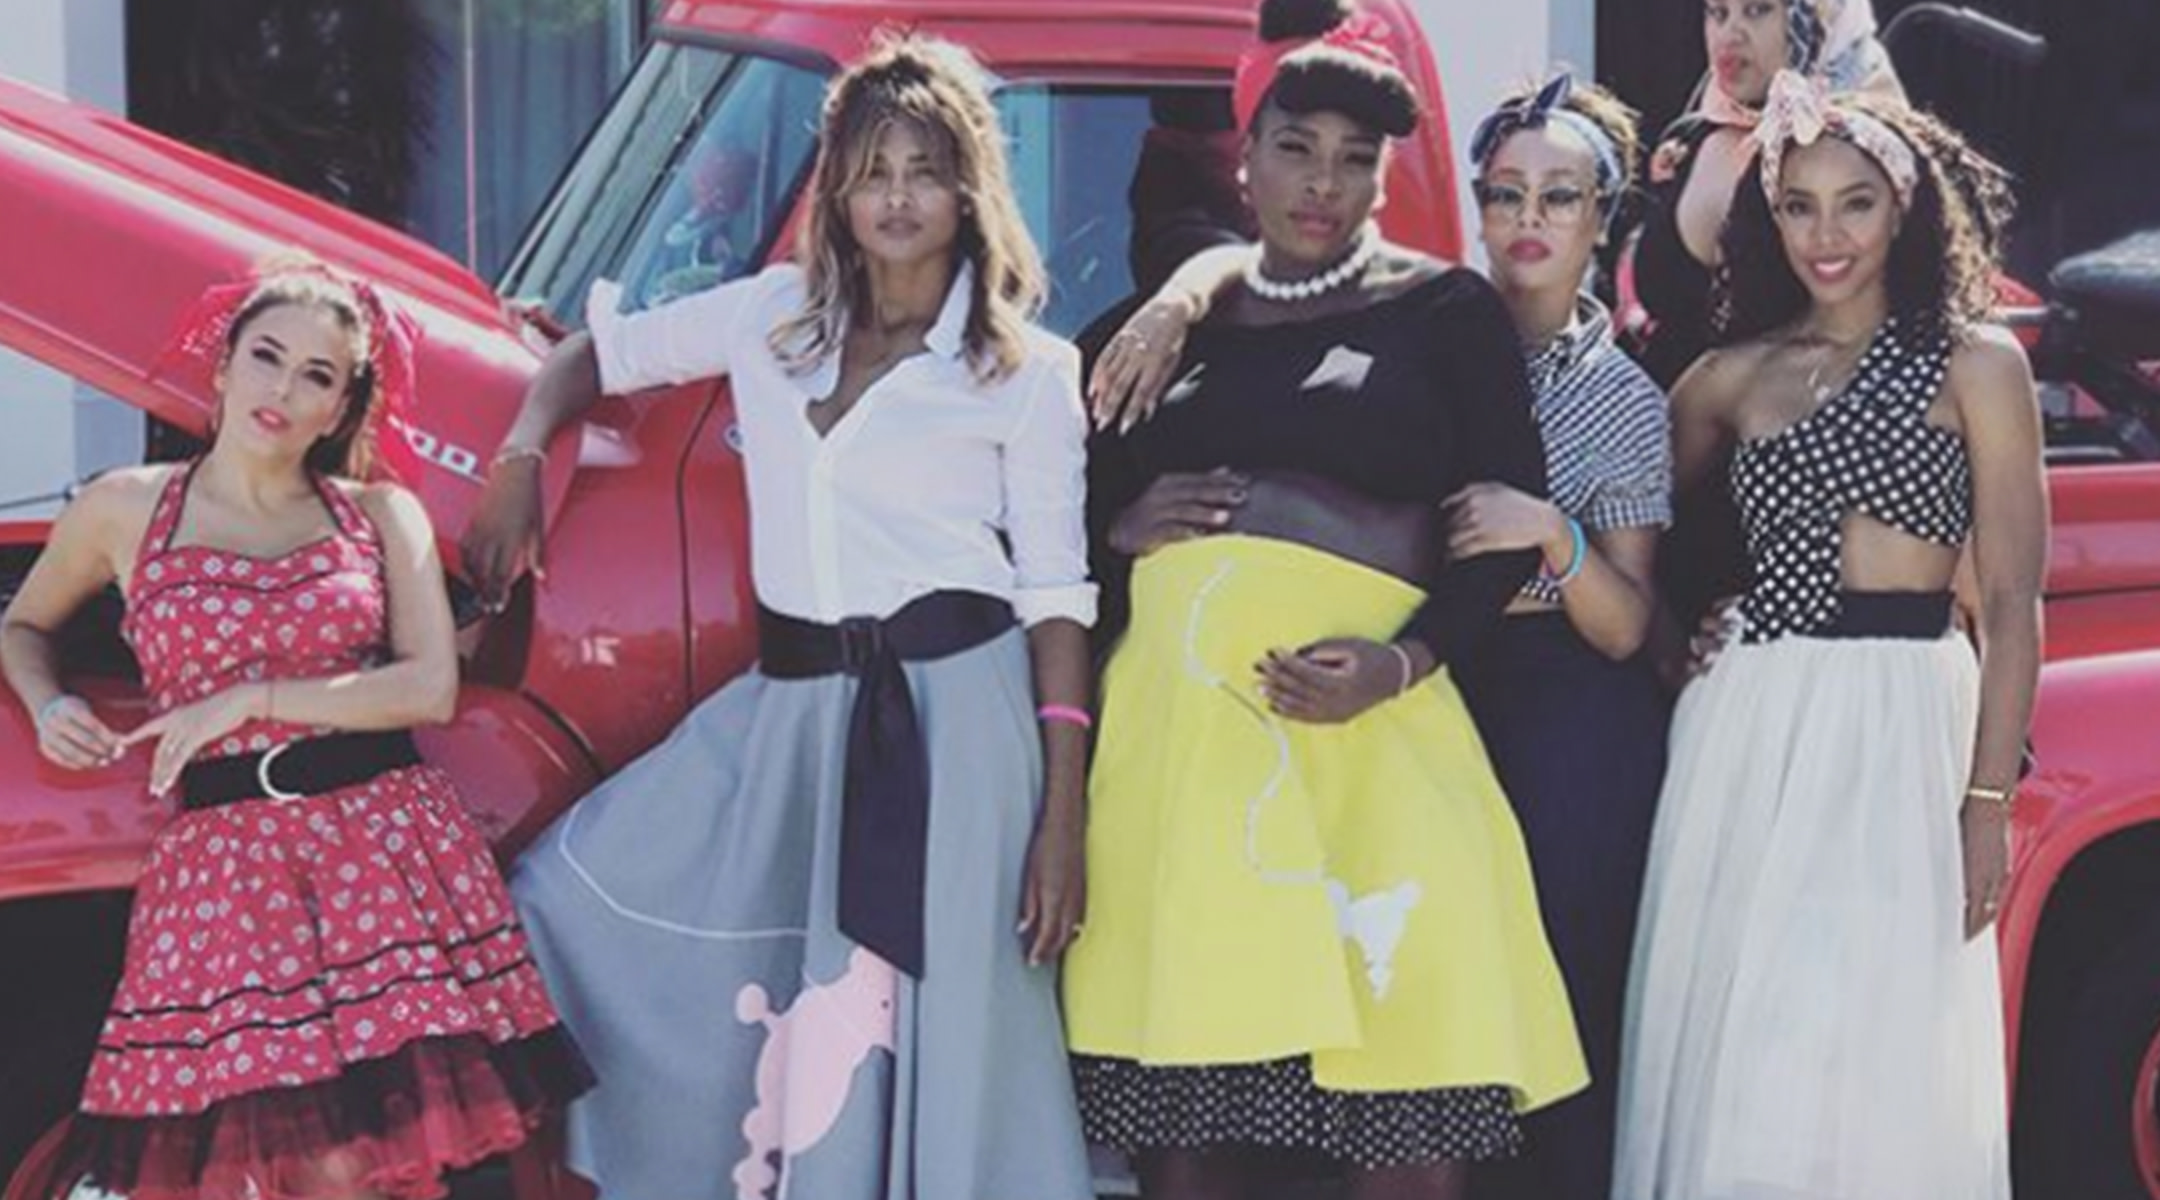 Serena Williams and celebrities posing in 1950s poodle skirts in front of a vintage red pickup truck at her baby shower